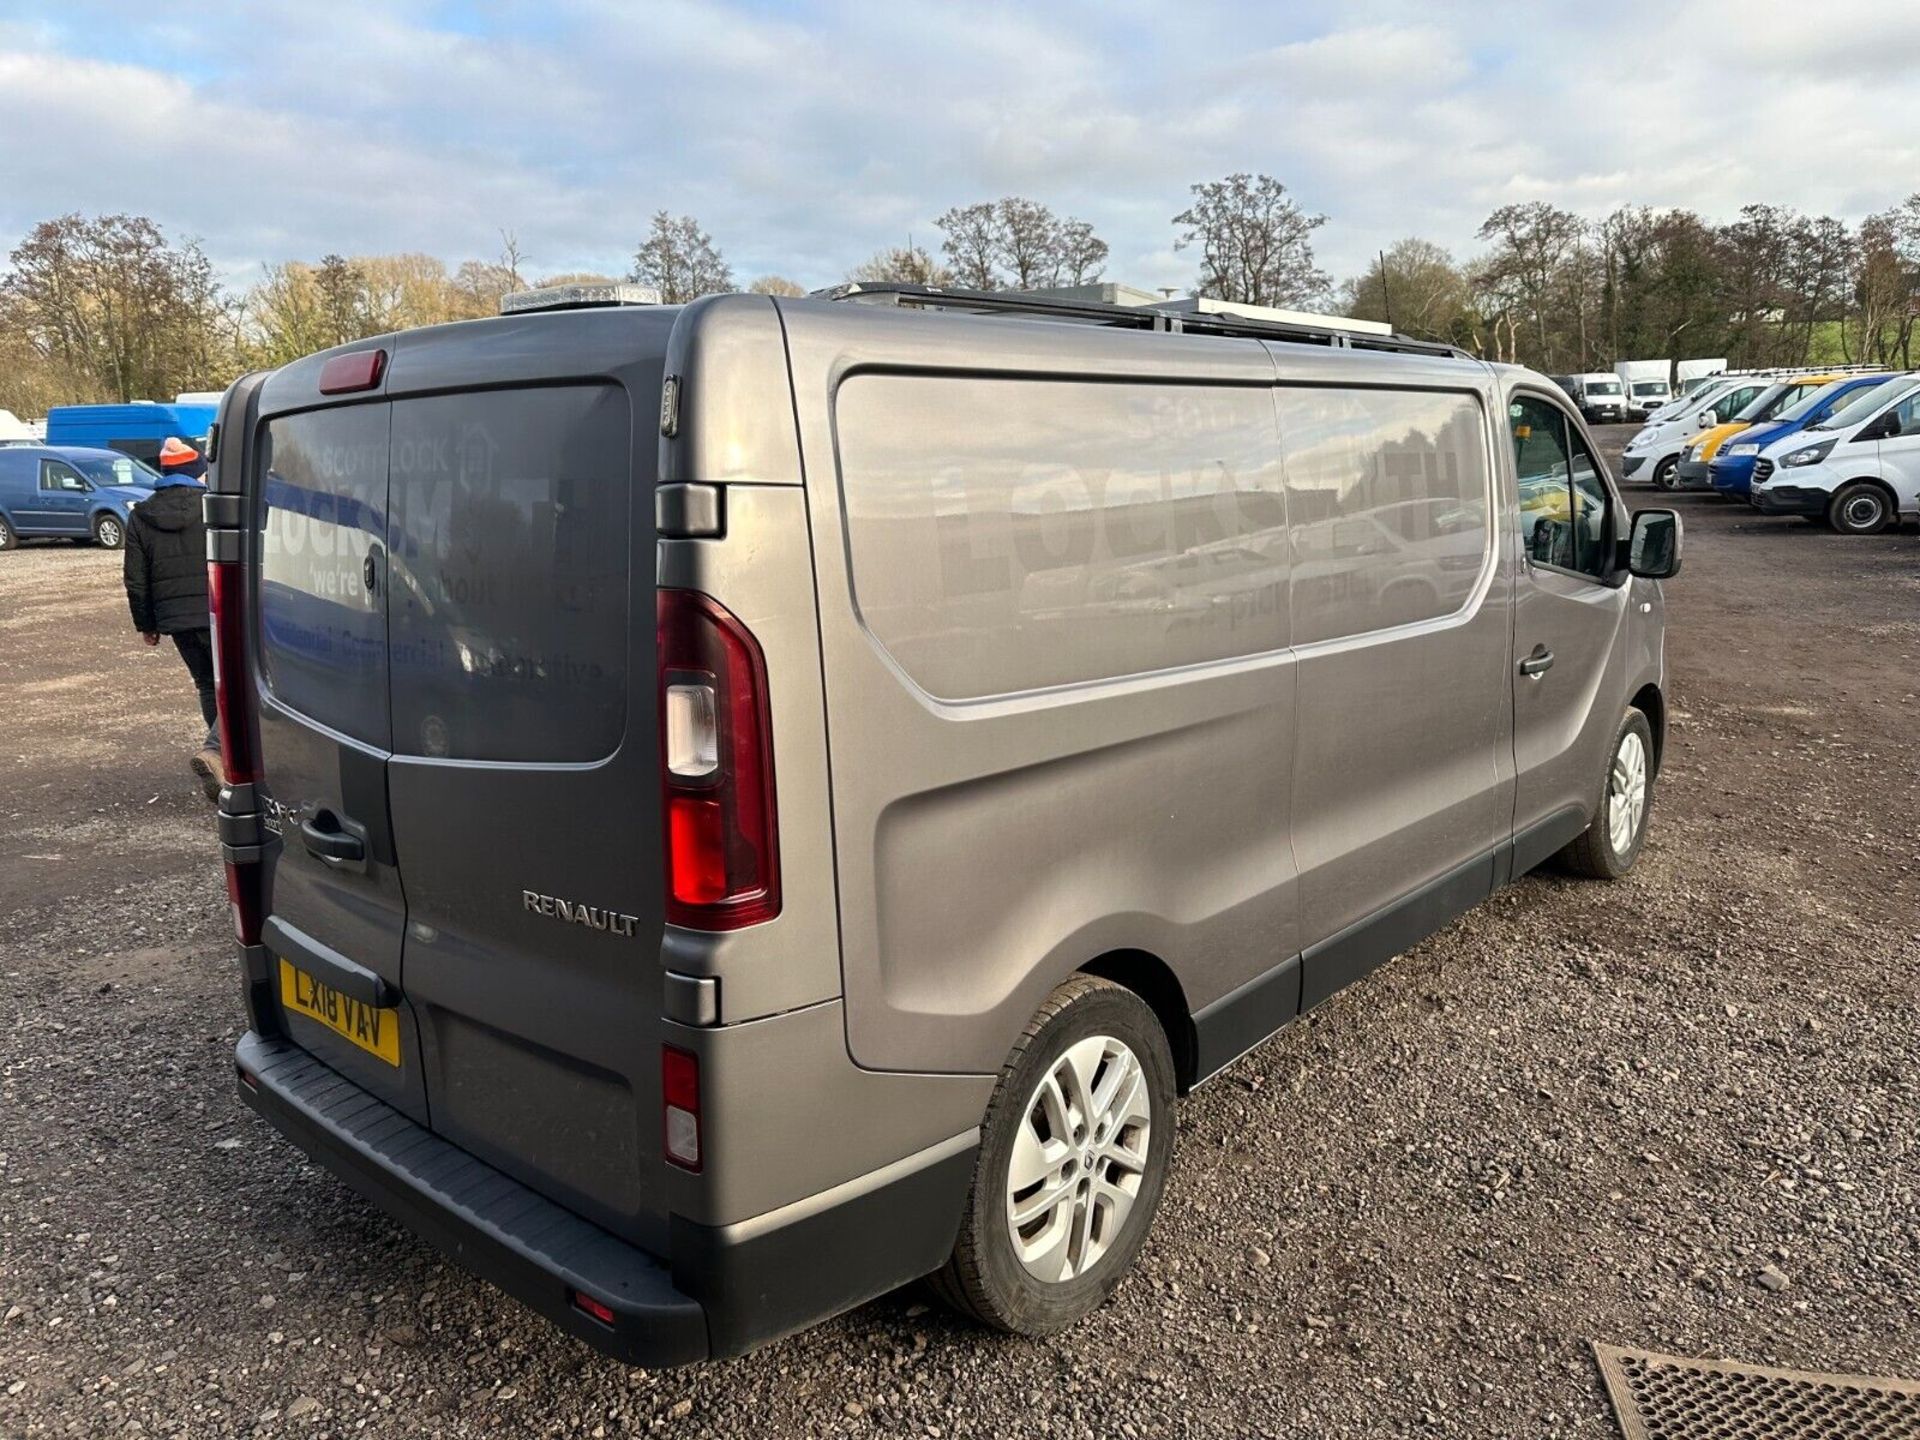 >>--NO VAT ON HAMMER--<< RENAULT TRAFIC REVIVAL: CLEAN BODY, INTERIOR - REPAIR OPPORTUNITY - Image 14 of 16